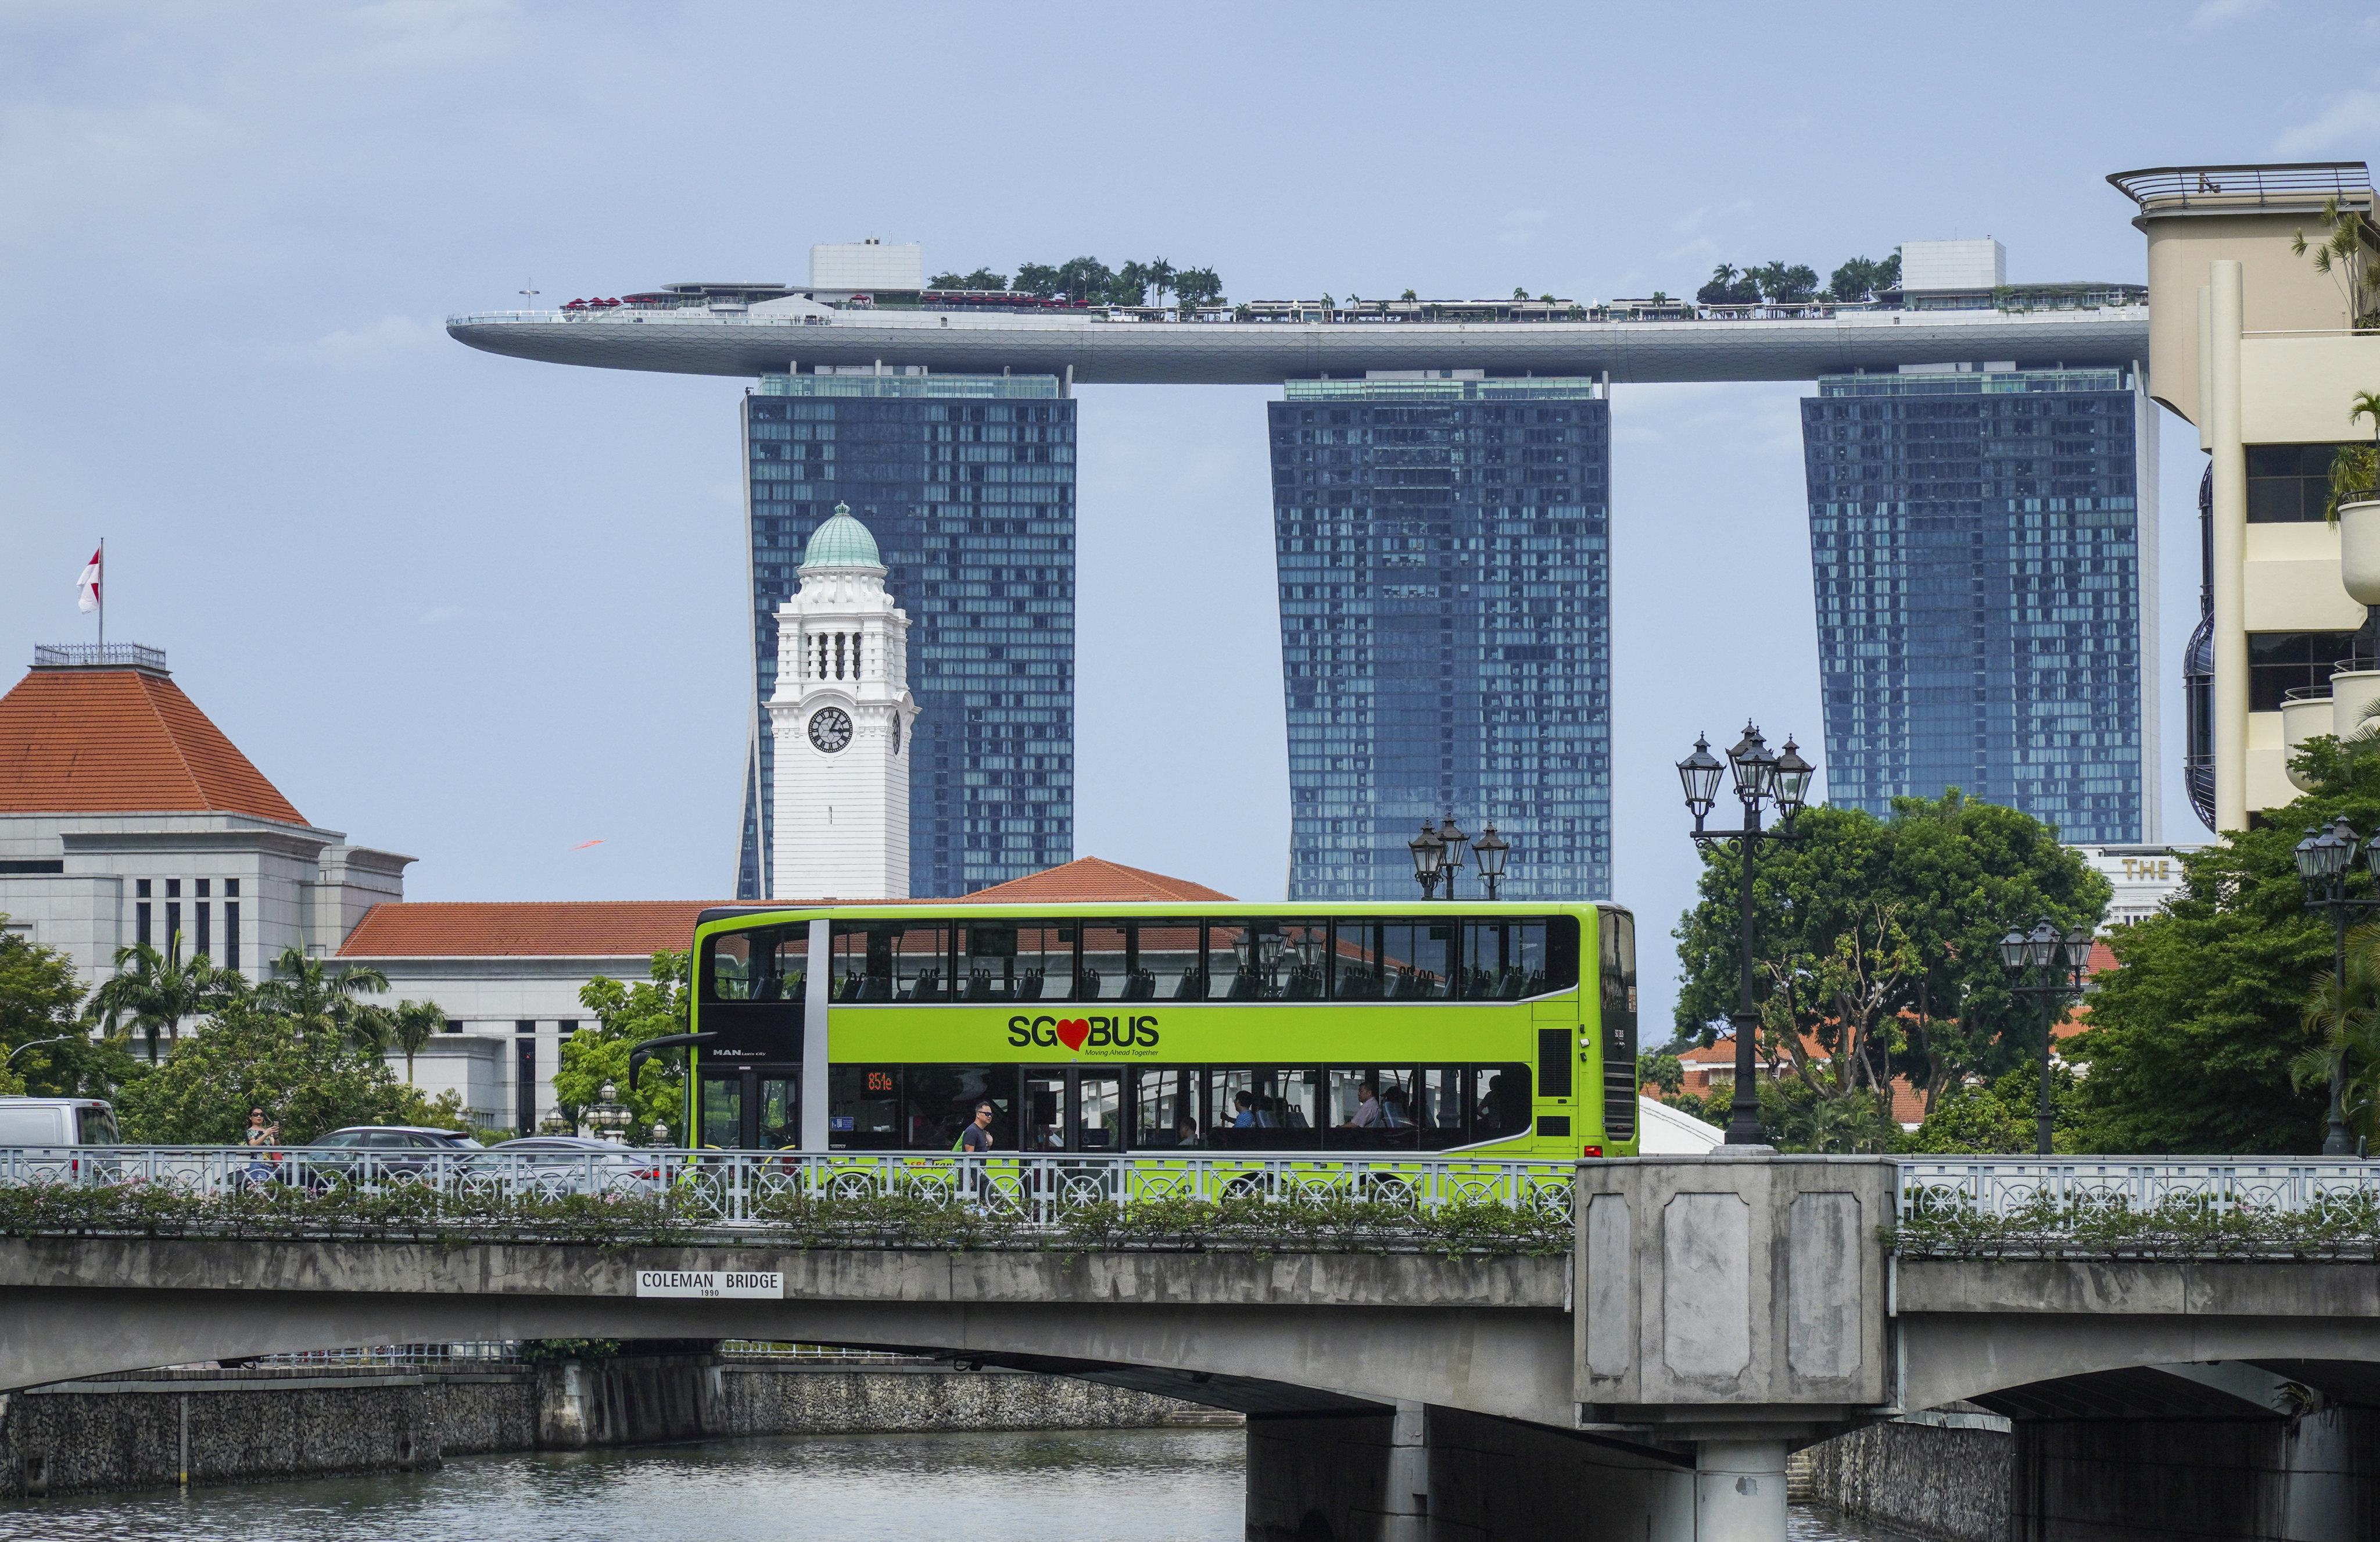 A public bus passes a bridge in Clarke Quay in front of the Marina Bay Sands Hotel in Singapore. SimplyGo was introduced in 2019 by LTA to offer a range of digital ticketing and e-payment options for transit. The system allows cardholders to view fare history and top-up card balance on-the-go via a mobile application. Photo: Roy Issa